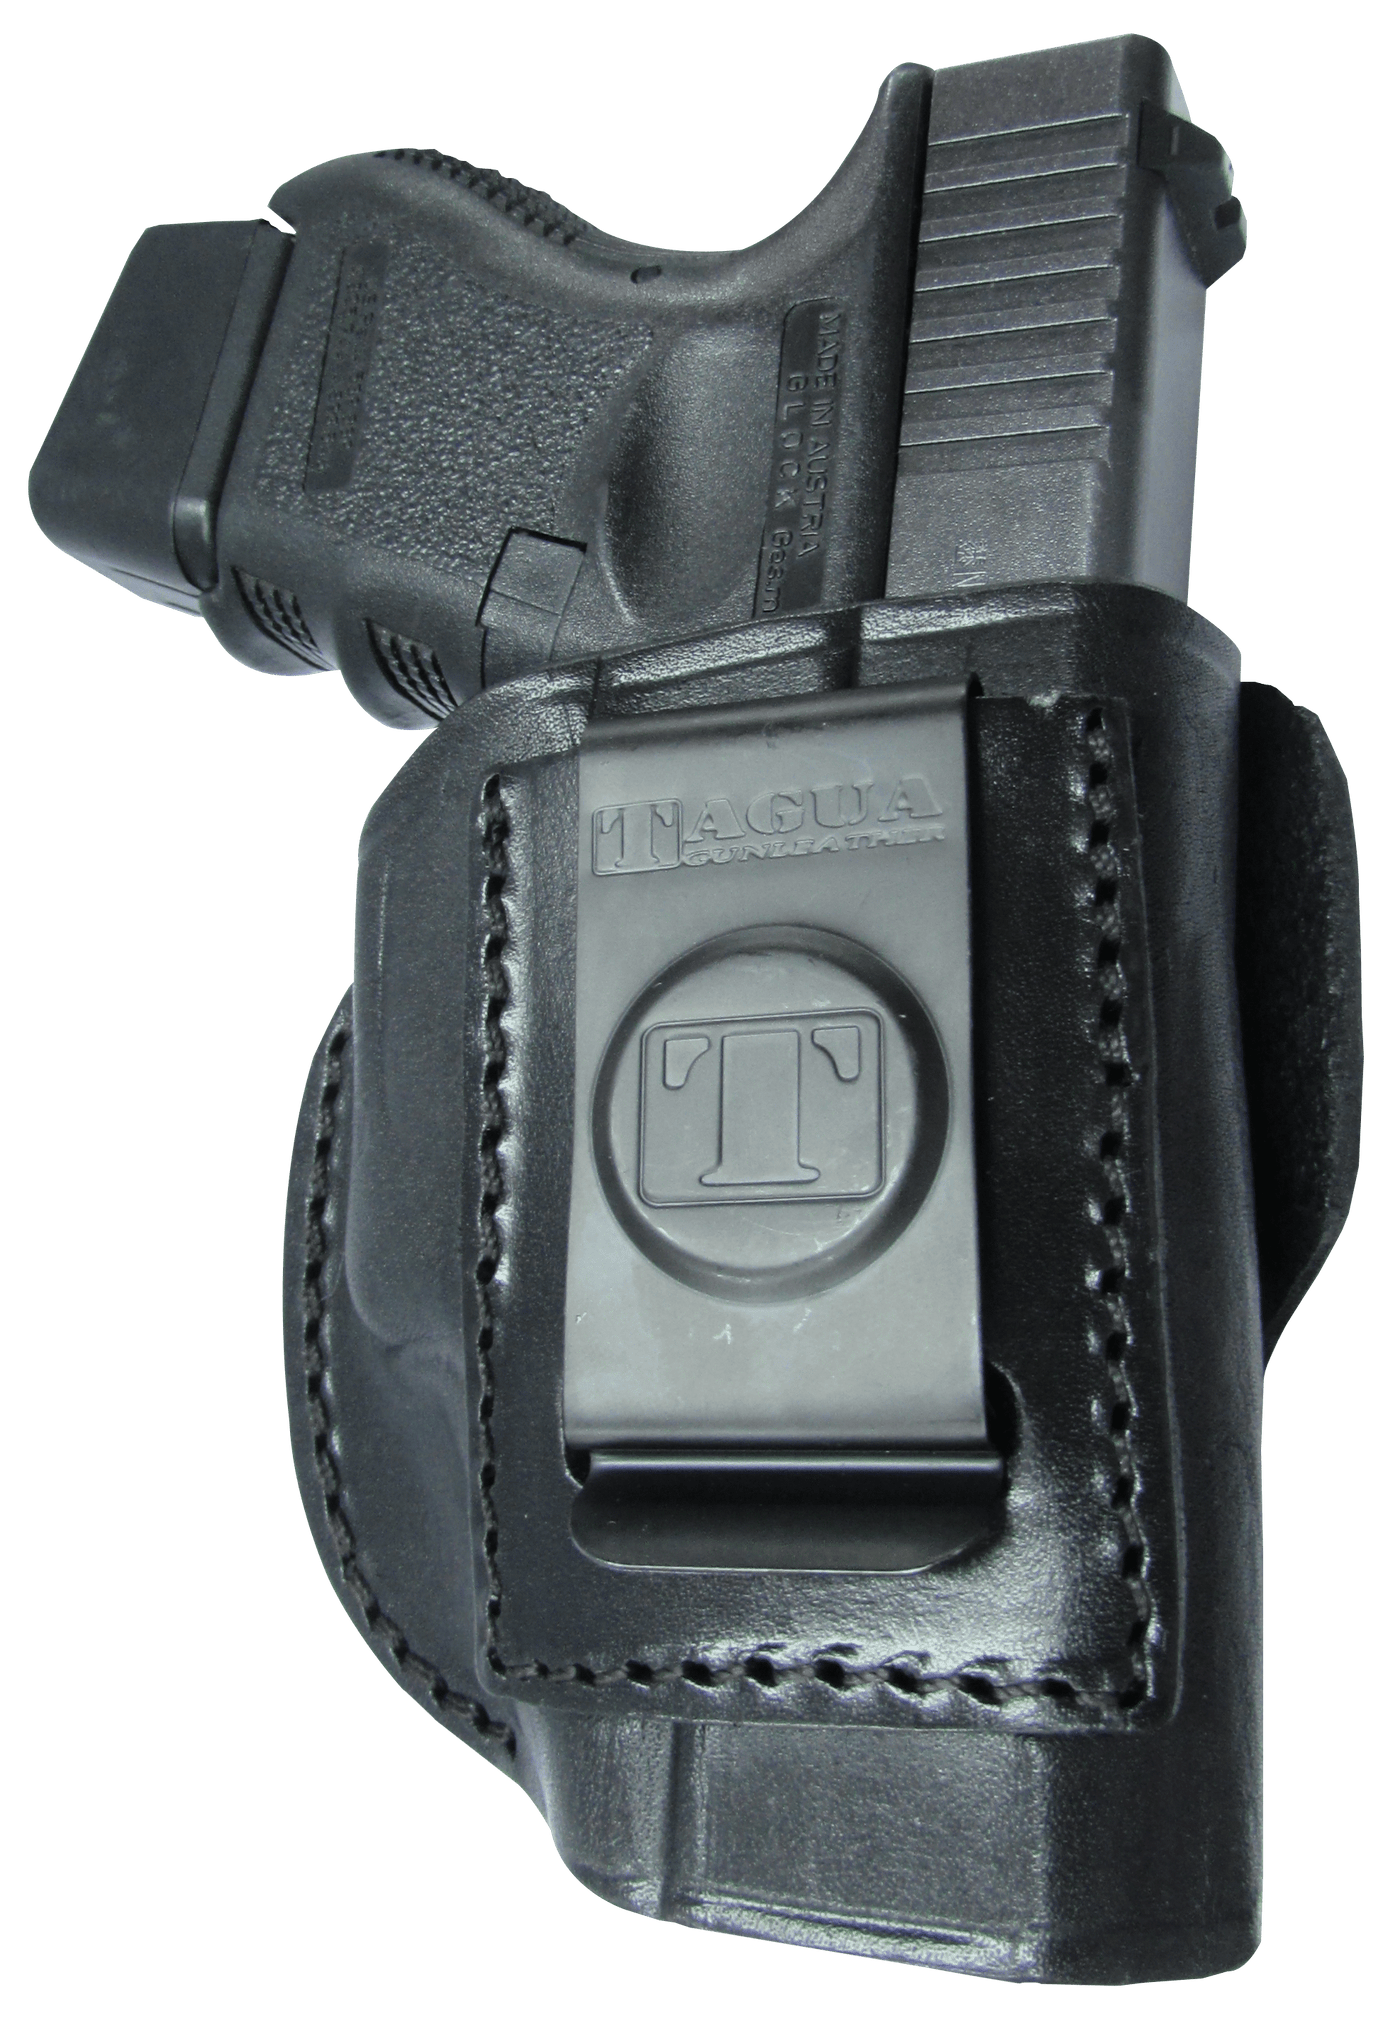 Tagua Tagua 4 In 1 Inside The Pant - Holster Glock 42 Black Rh Lthr Holsters And Related Items